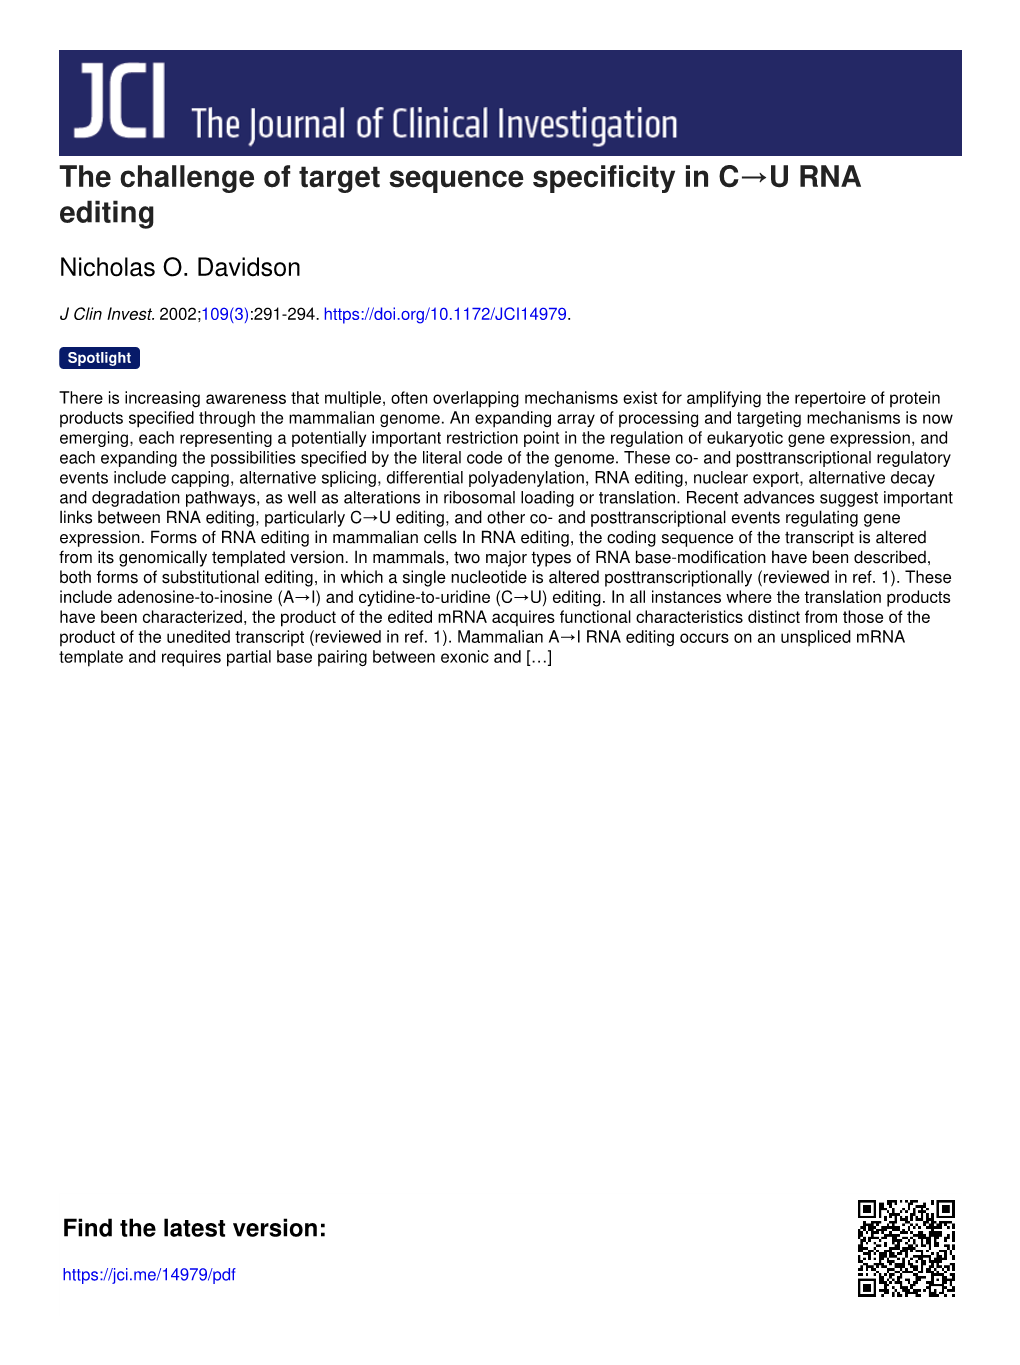 The Challenge of Target Sequence Specificity in C→U RNA Editing